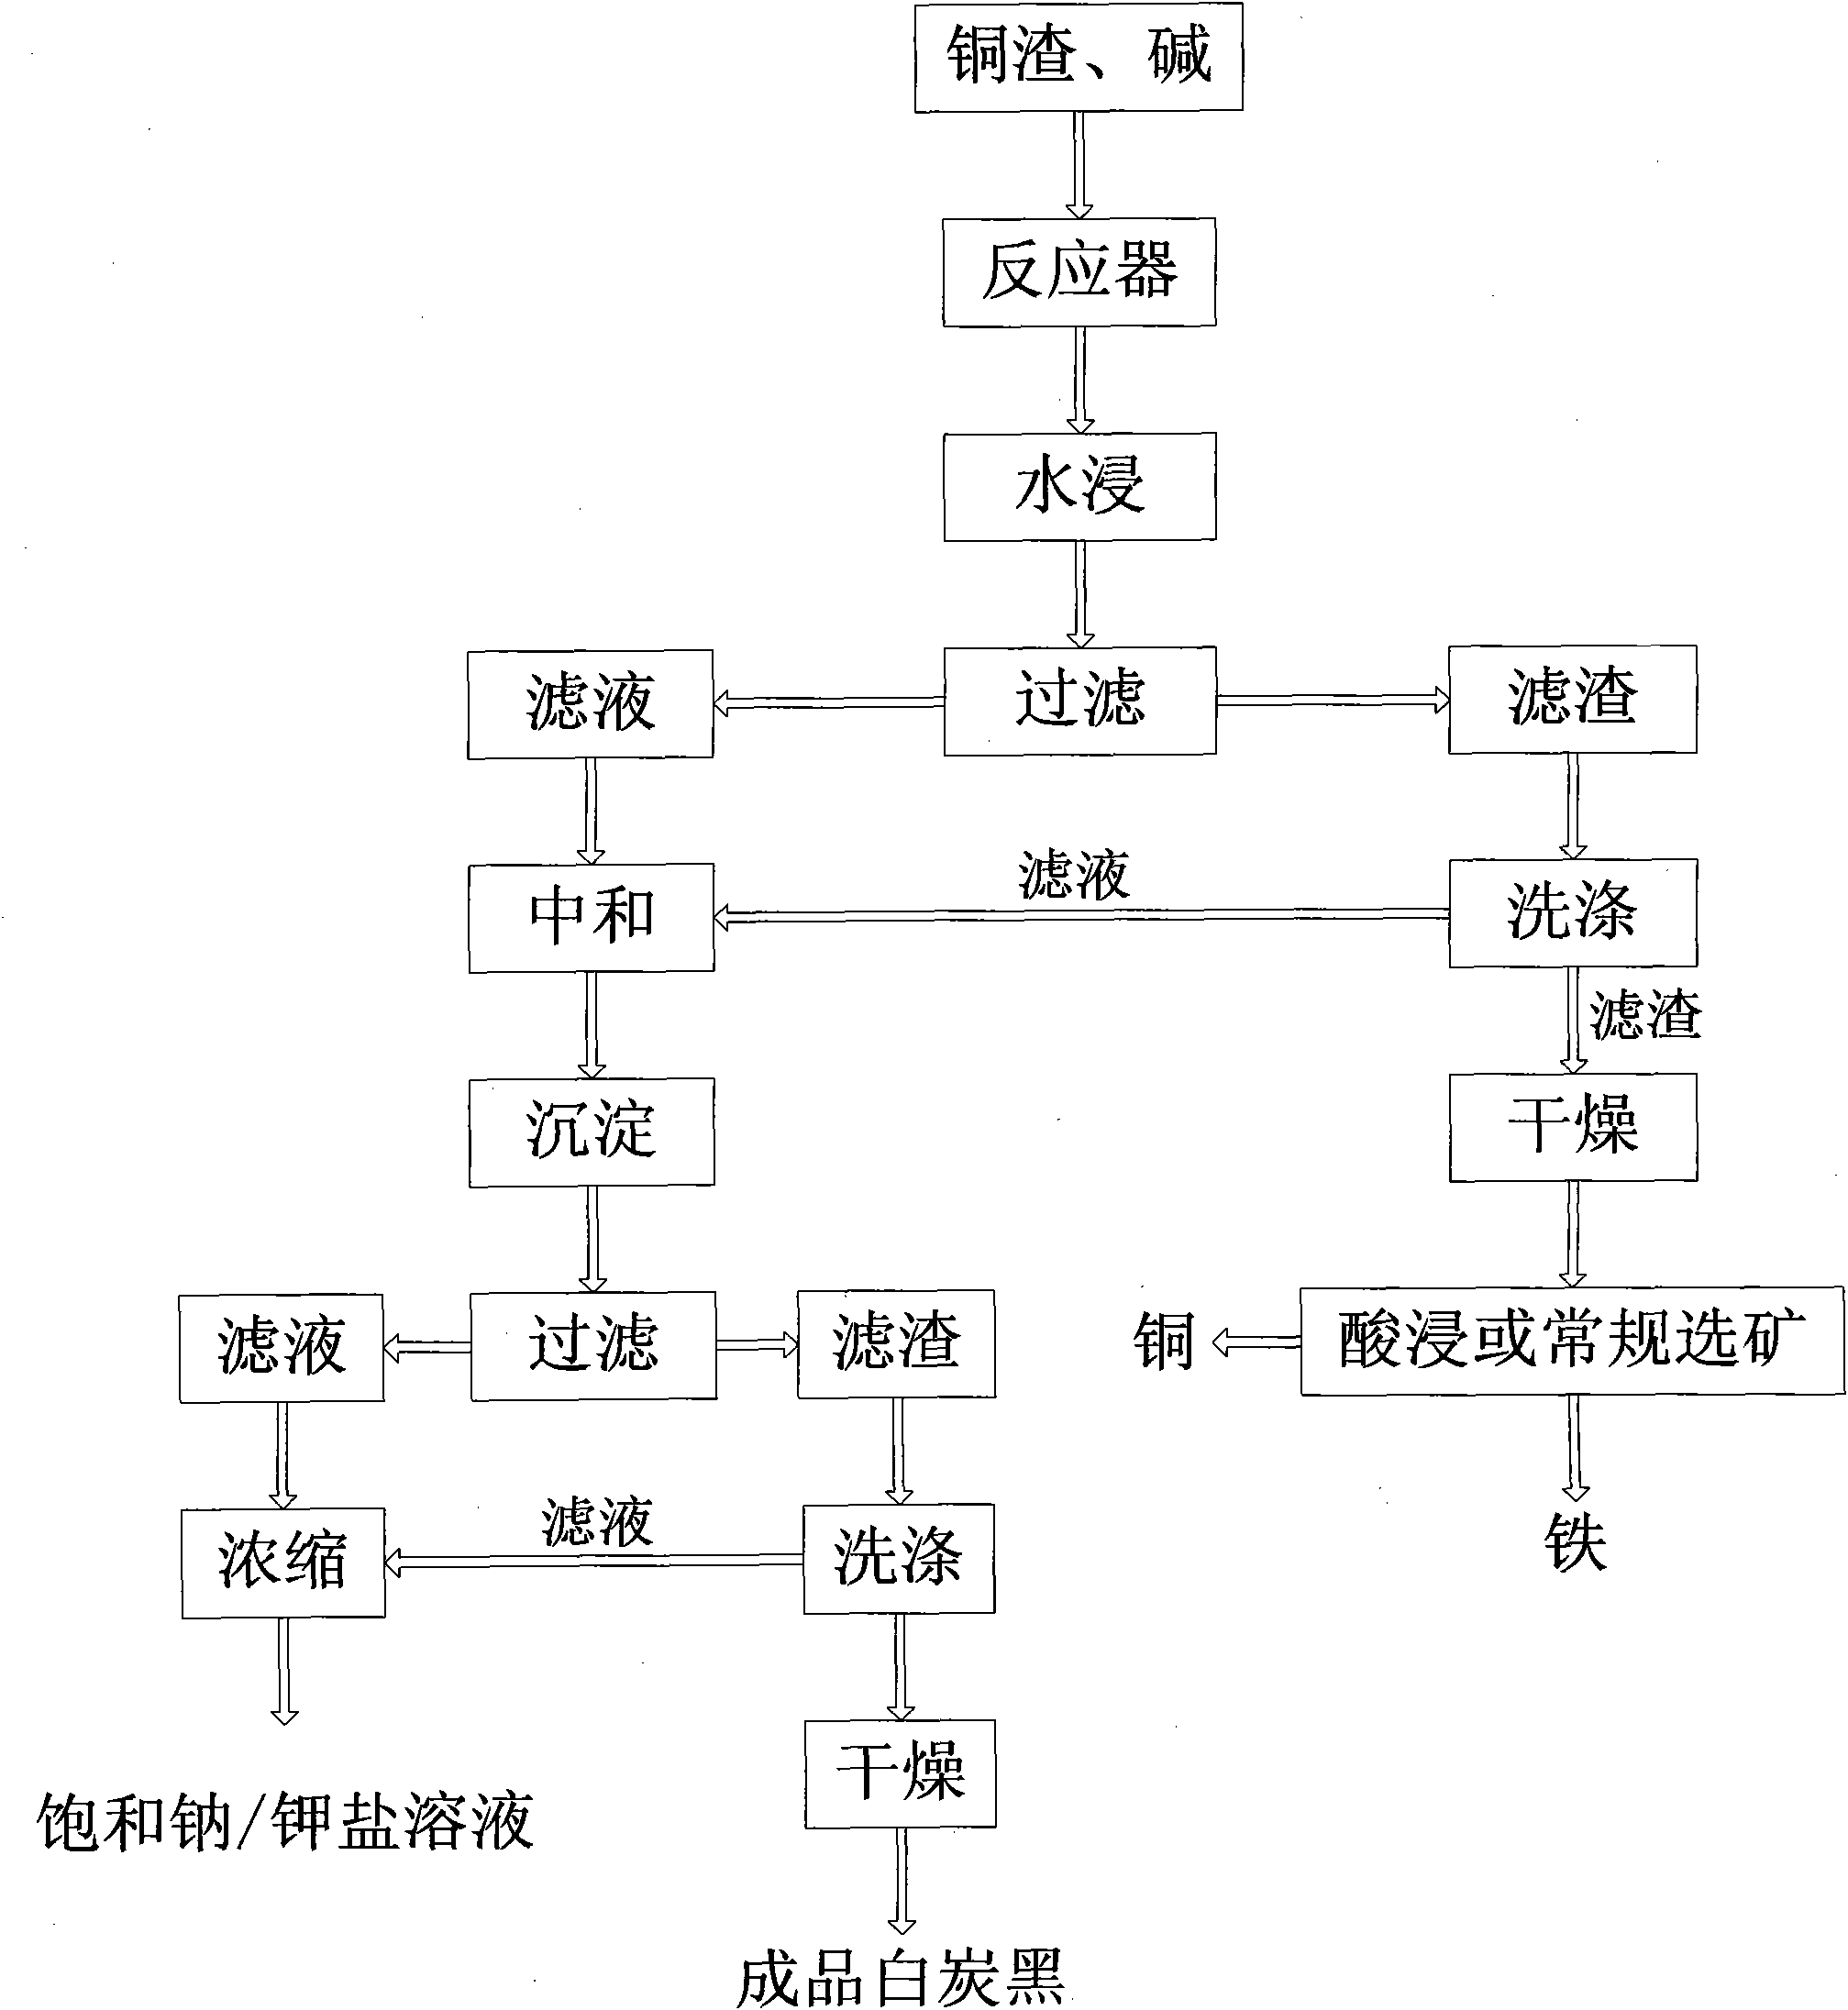 Method for separating ferrum, copper and silicon components from copper smelting residues